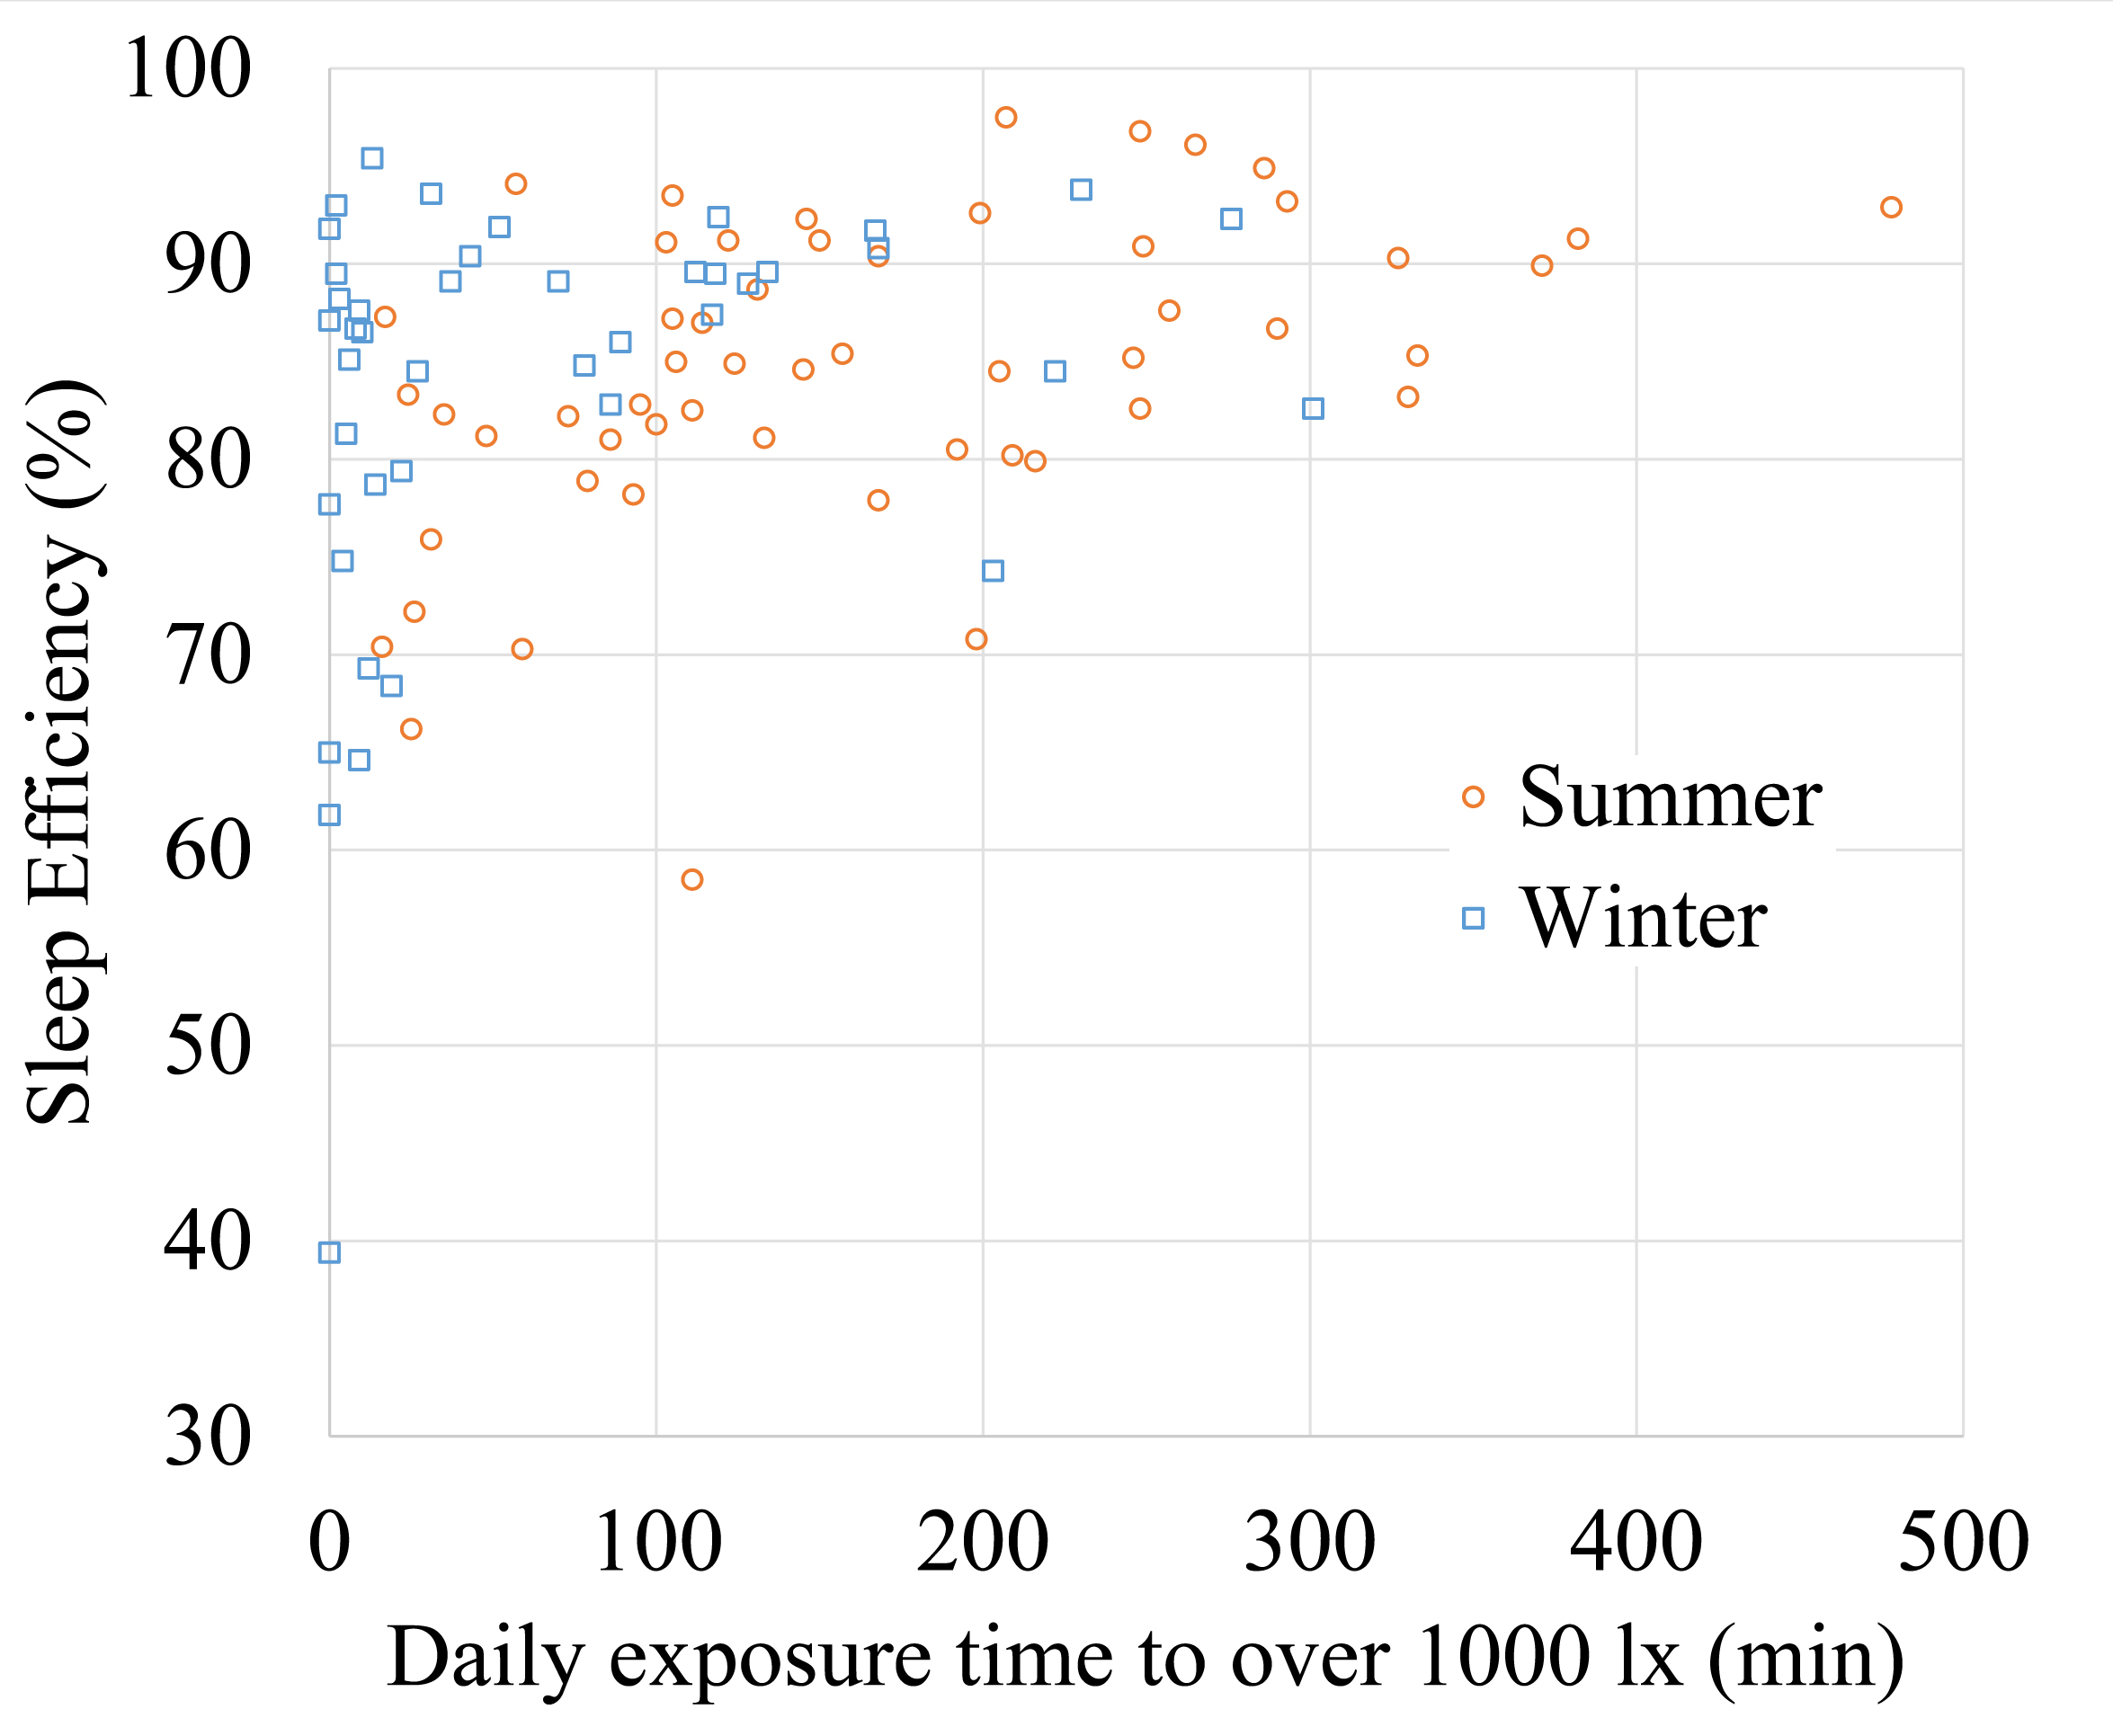 Scatter plot of sleep efficiency in relation to the exposure duration to light levels of 1 000 lx and over (n = 88) in summer and winter.